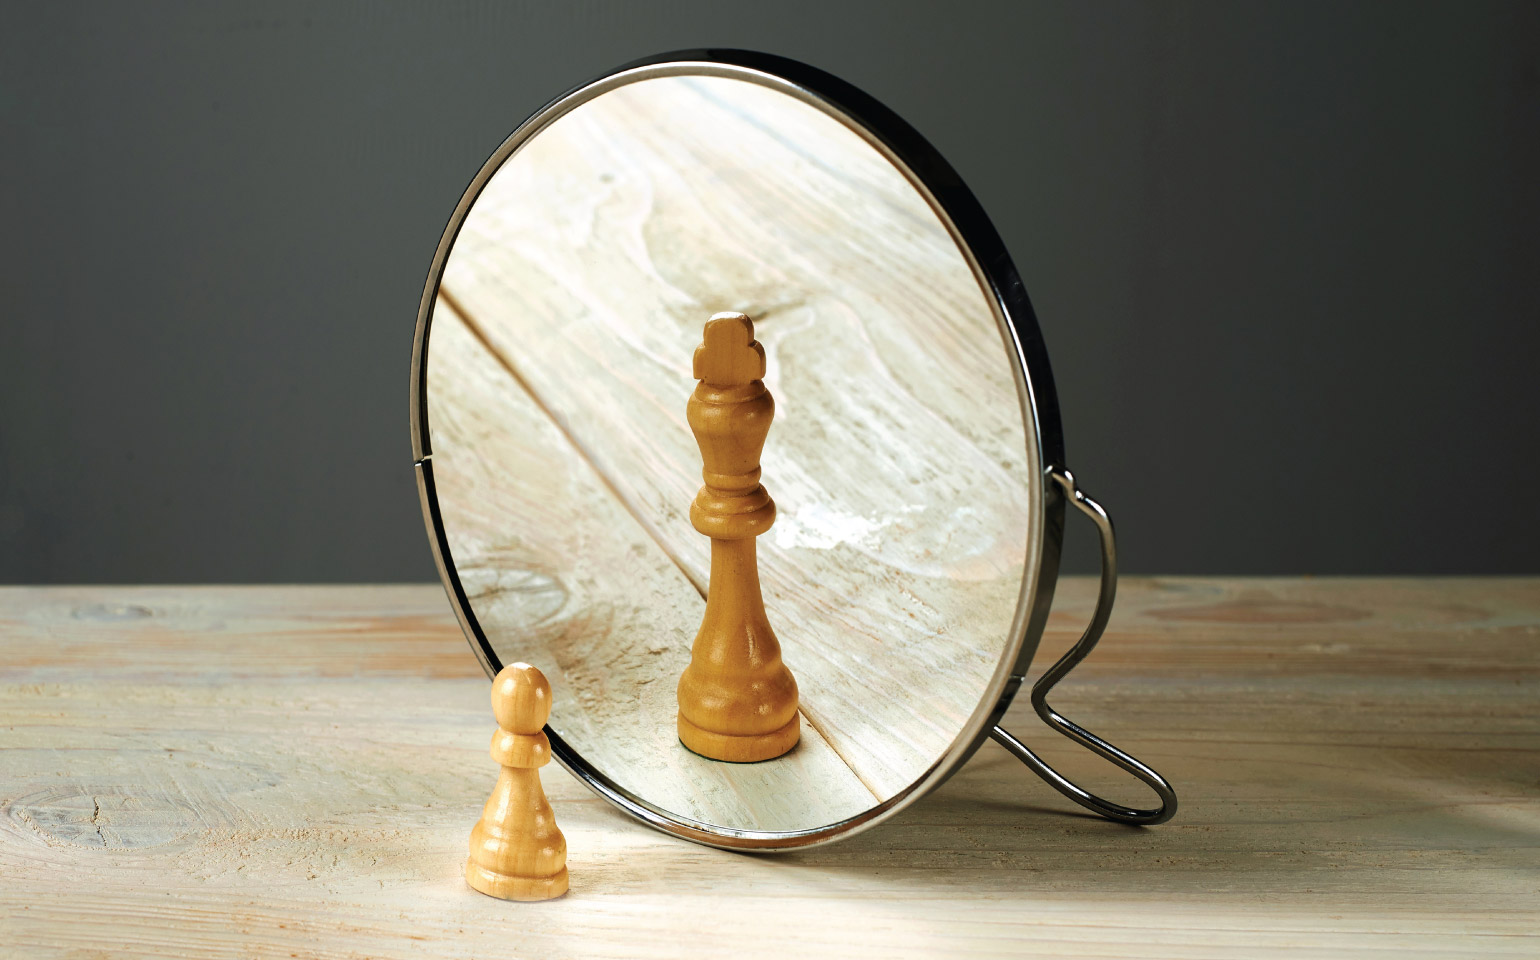 chess pawn in front of mirror reflection of a king